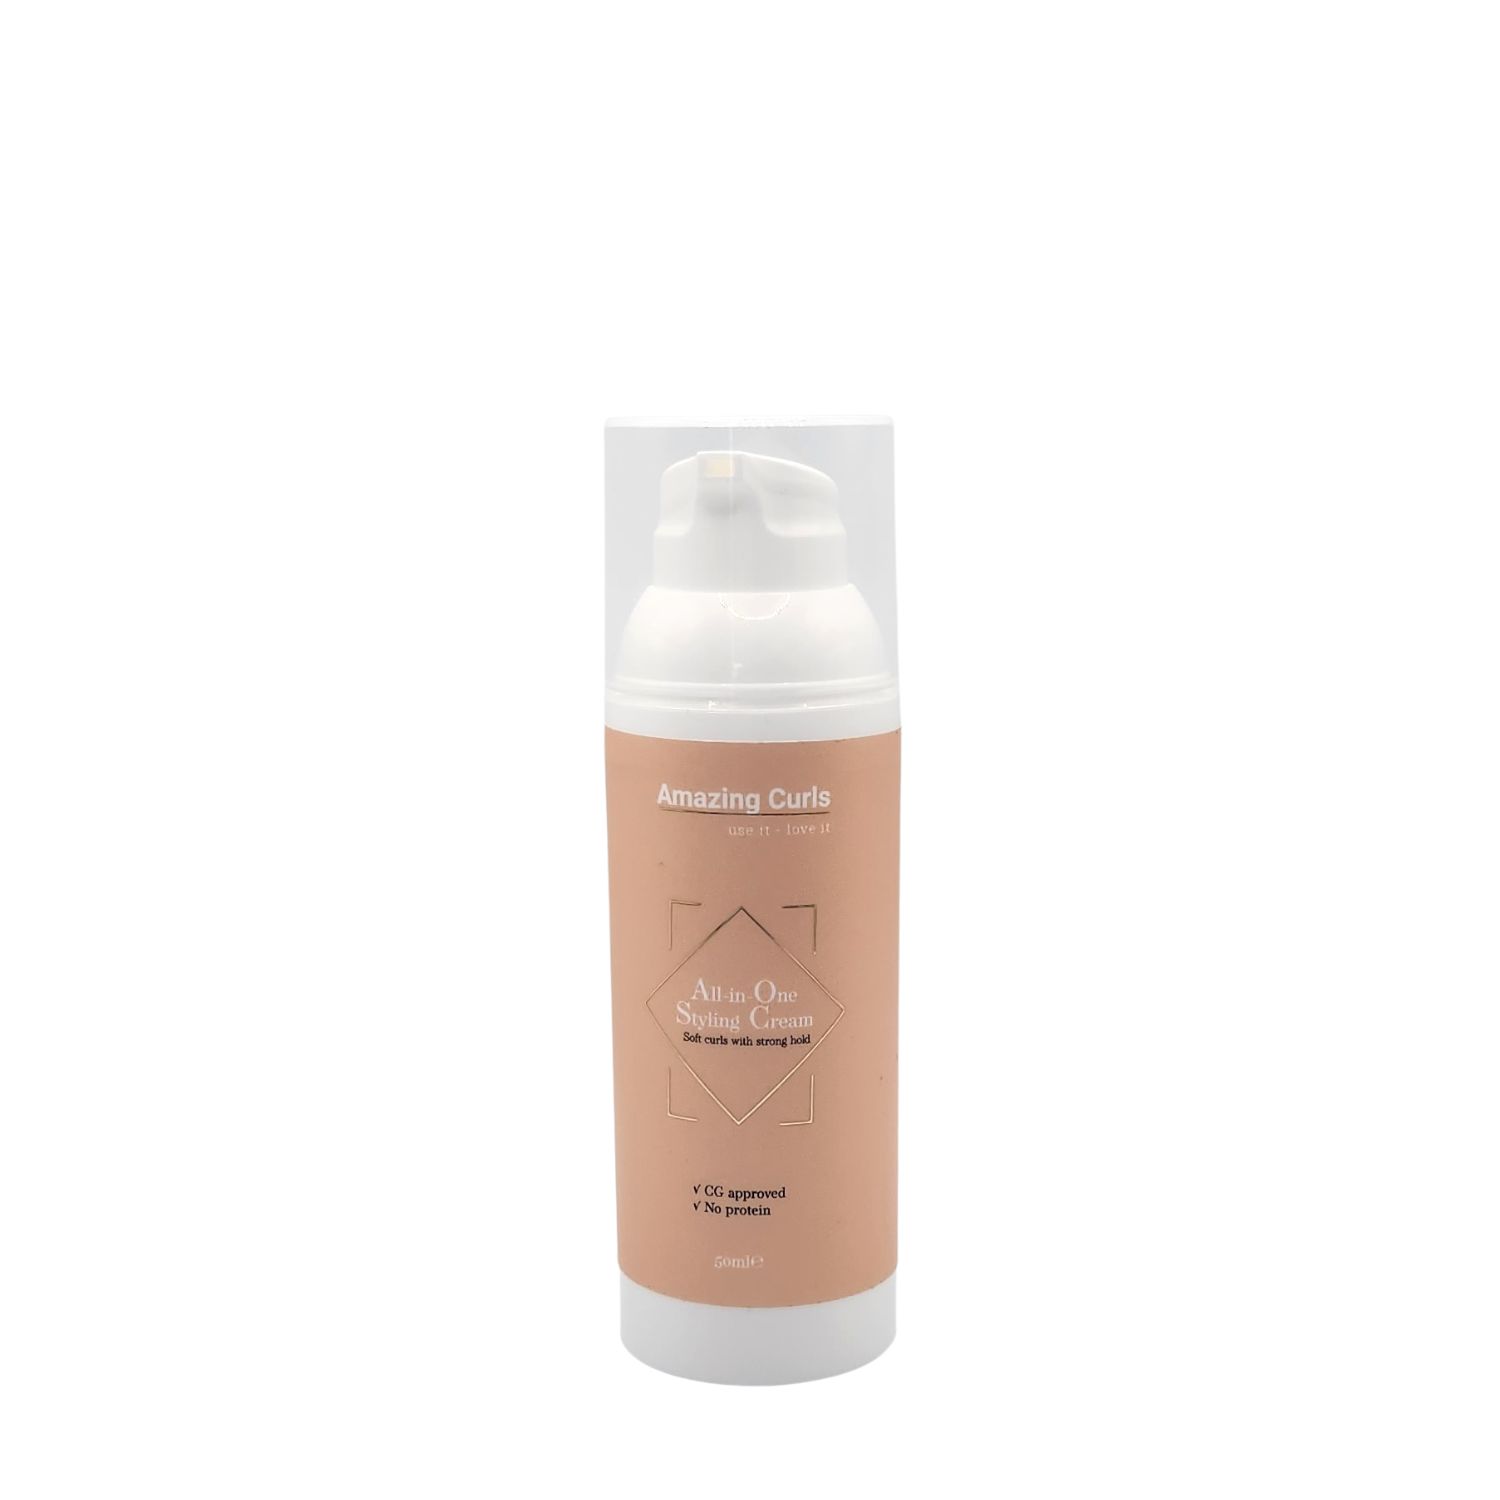 Amazing Curls All-in-One Styling Cream - Travelsize